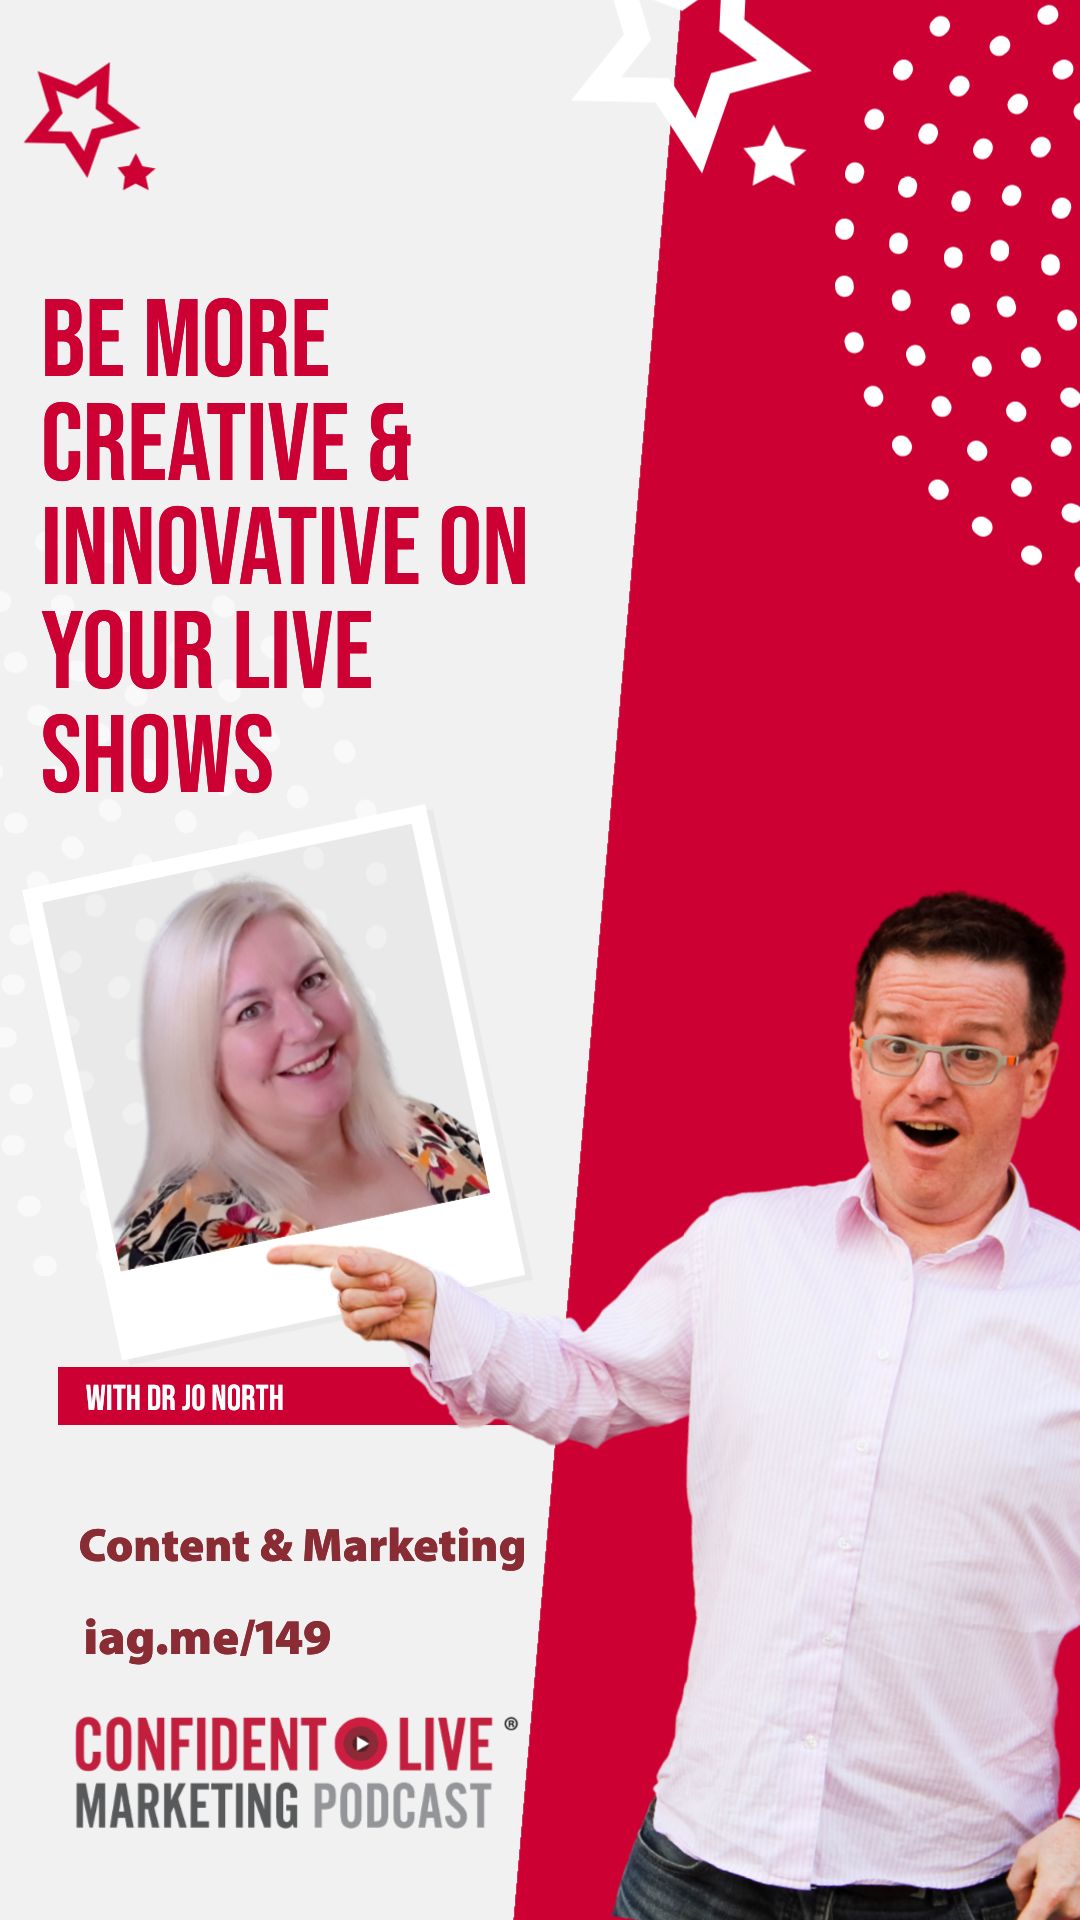 Be More Creative & Innovative on your Live Shows